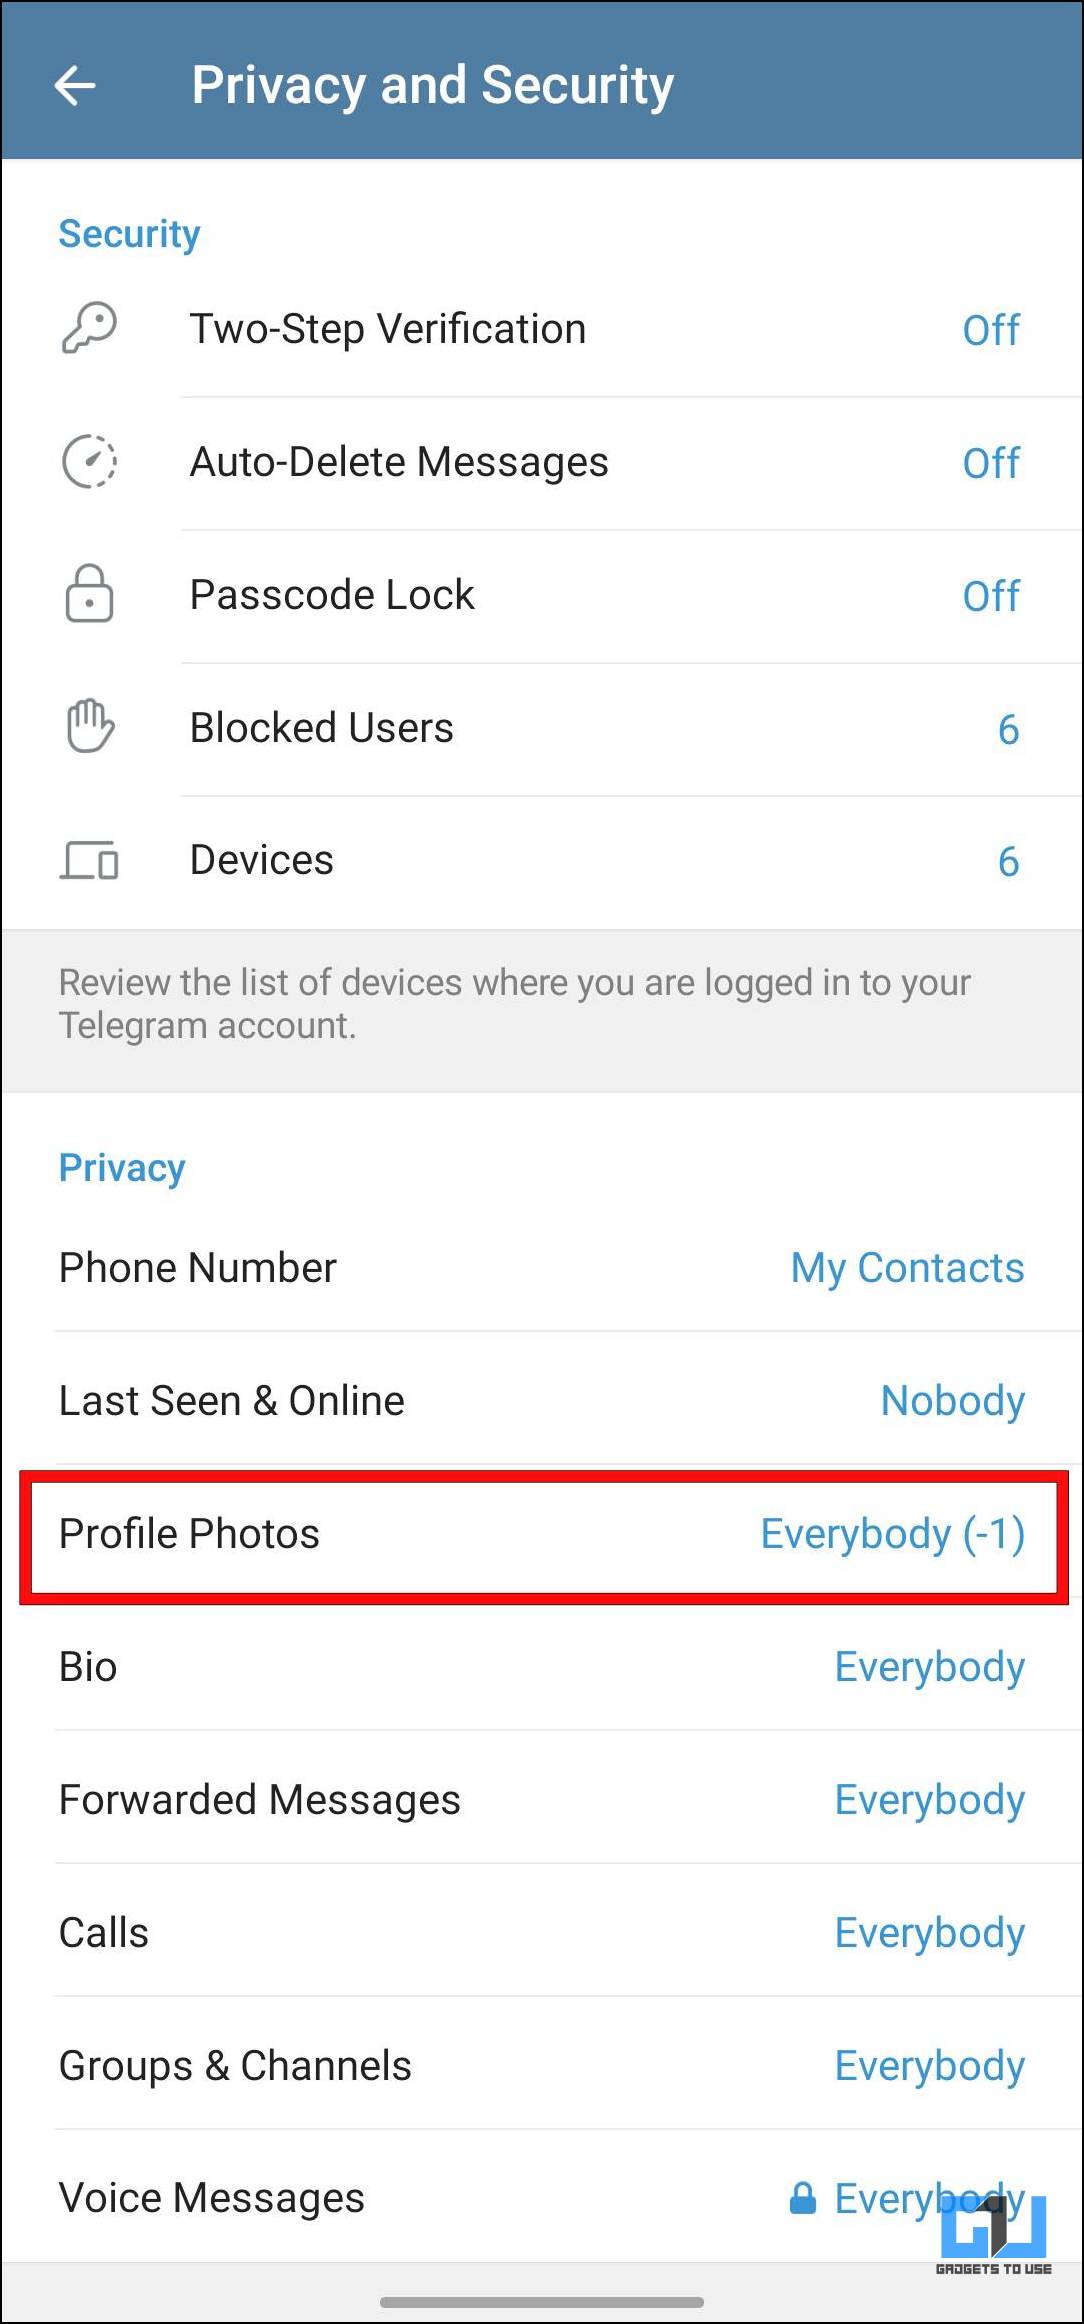 Visit Profile Photo in Privacy Settings